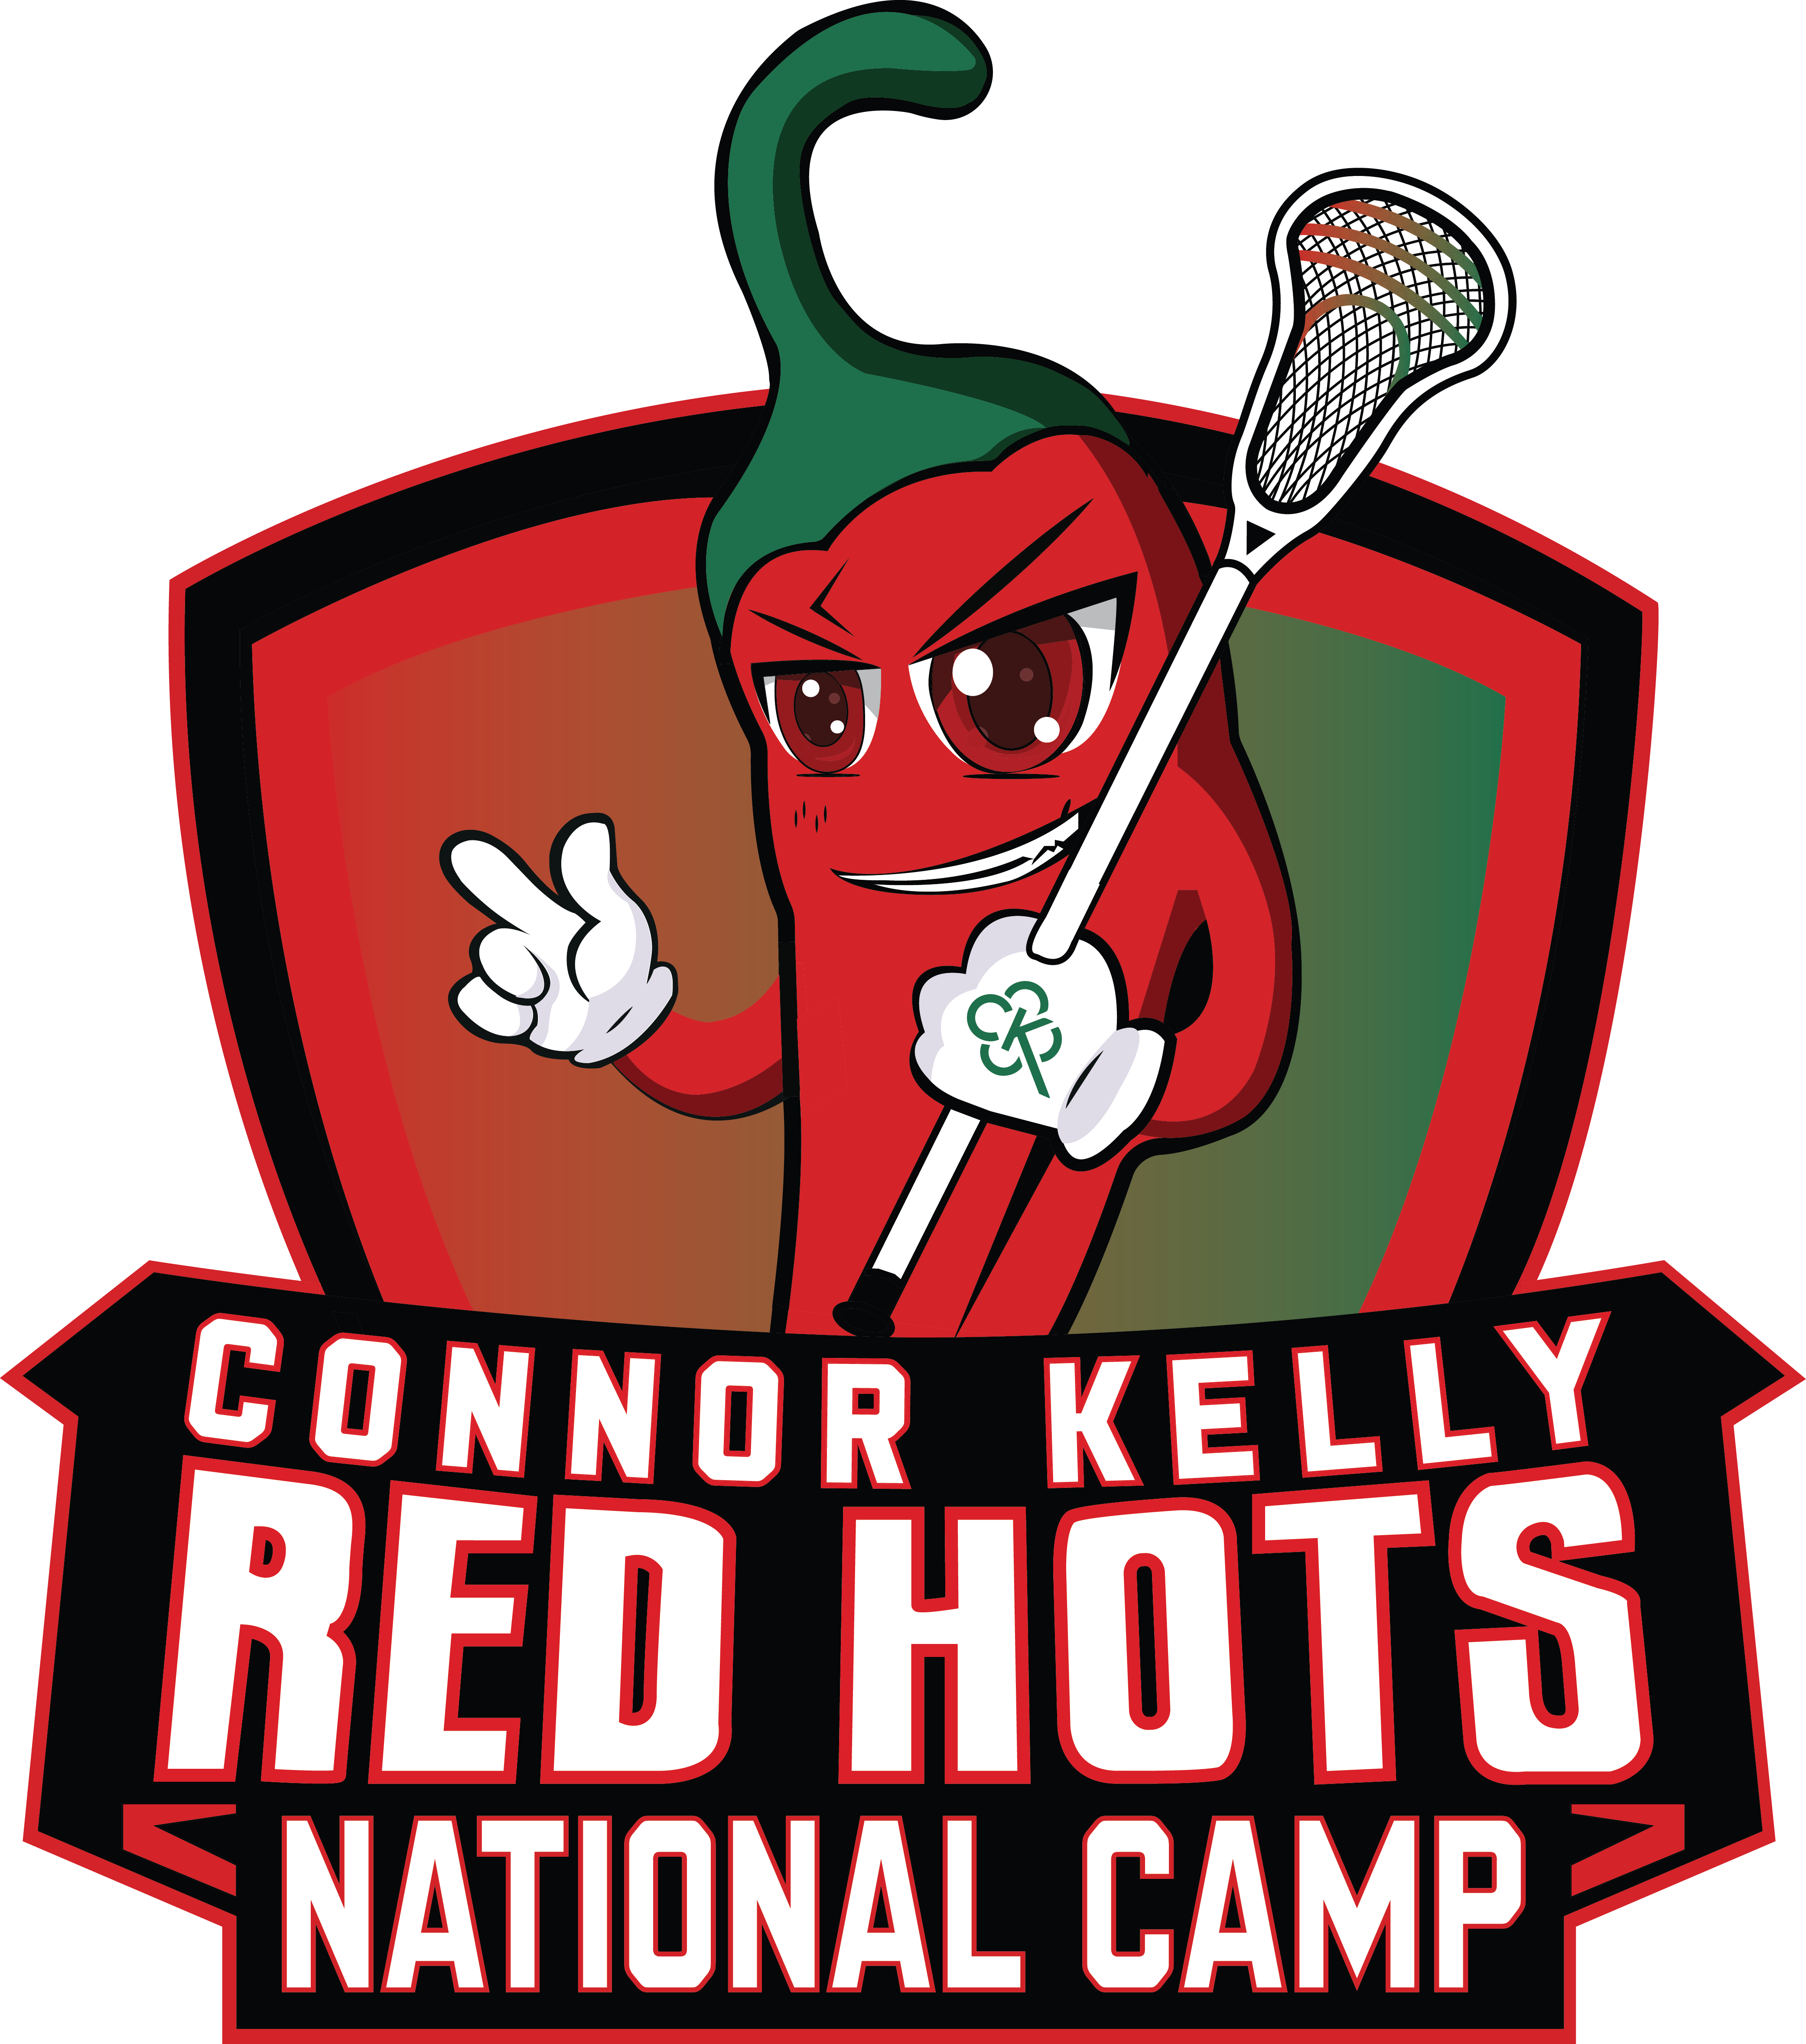 Connor Kelly Red Hots National Camp: Avon Old Farms